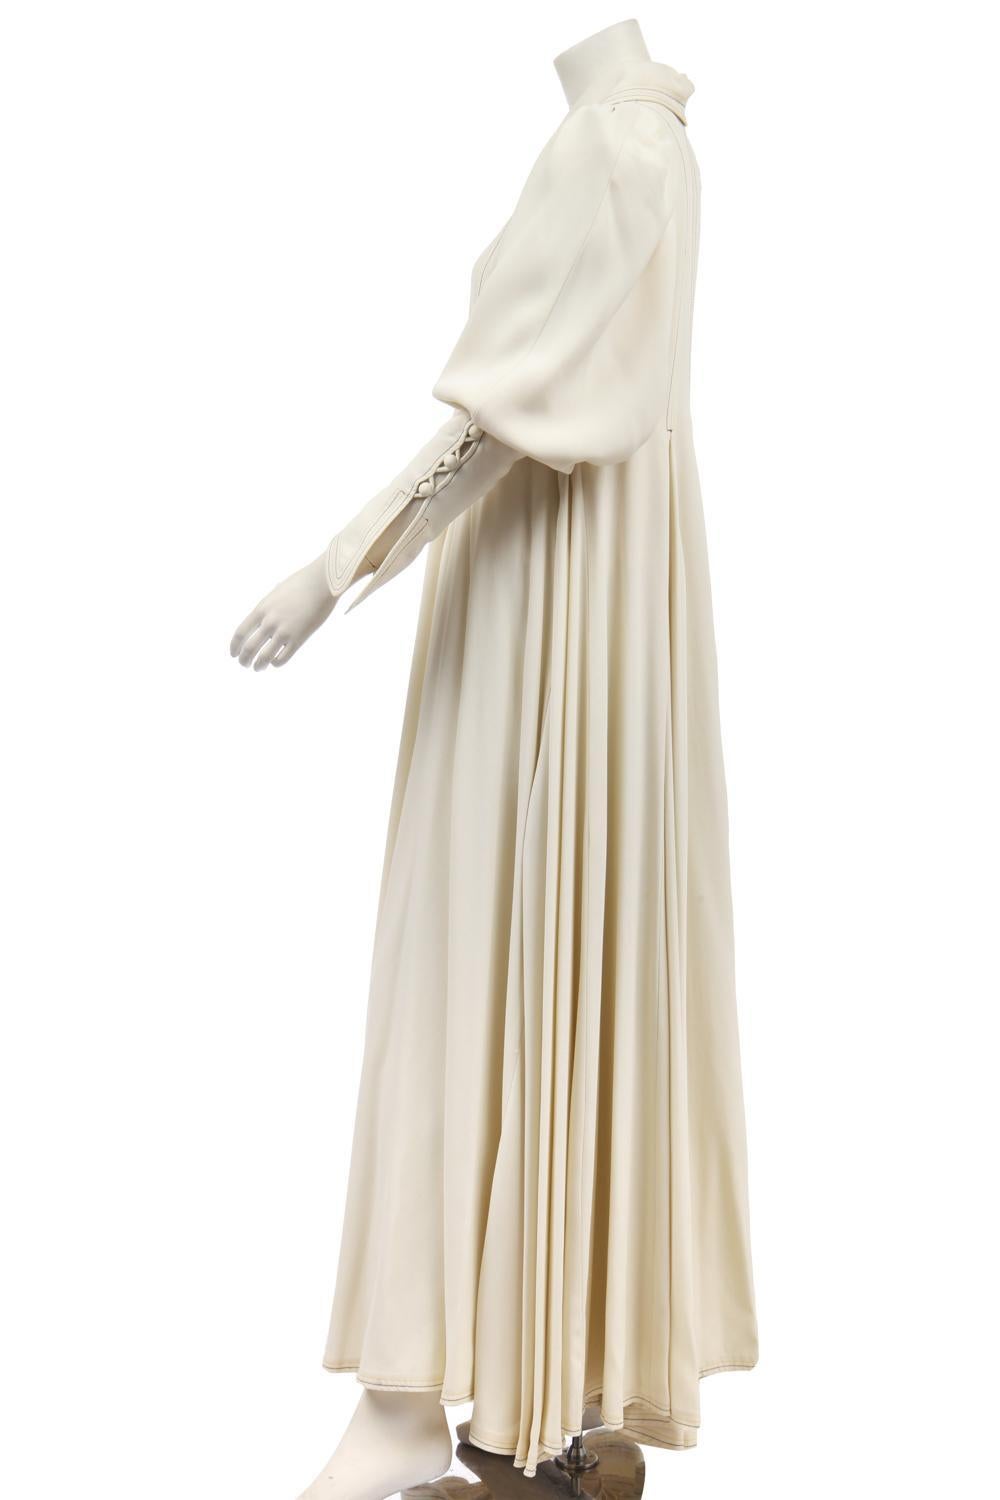 Bill Gibb F/W 1972 Ivory Moss Crepe Gown In Excellent Condition For Sale In Studio City, CA